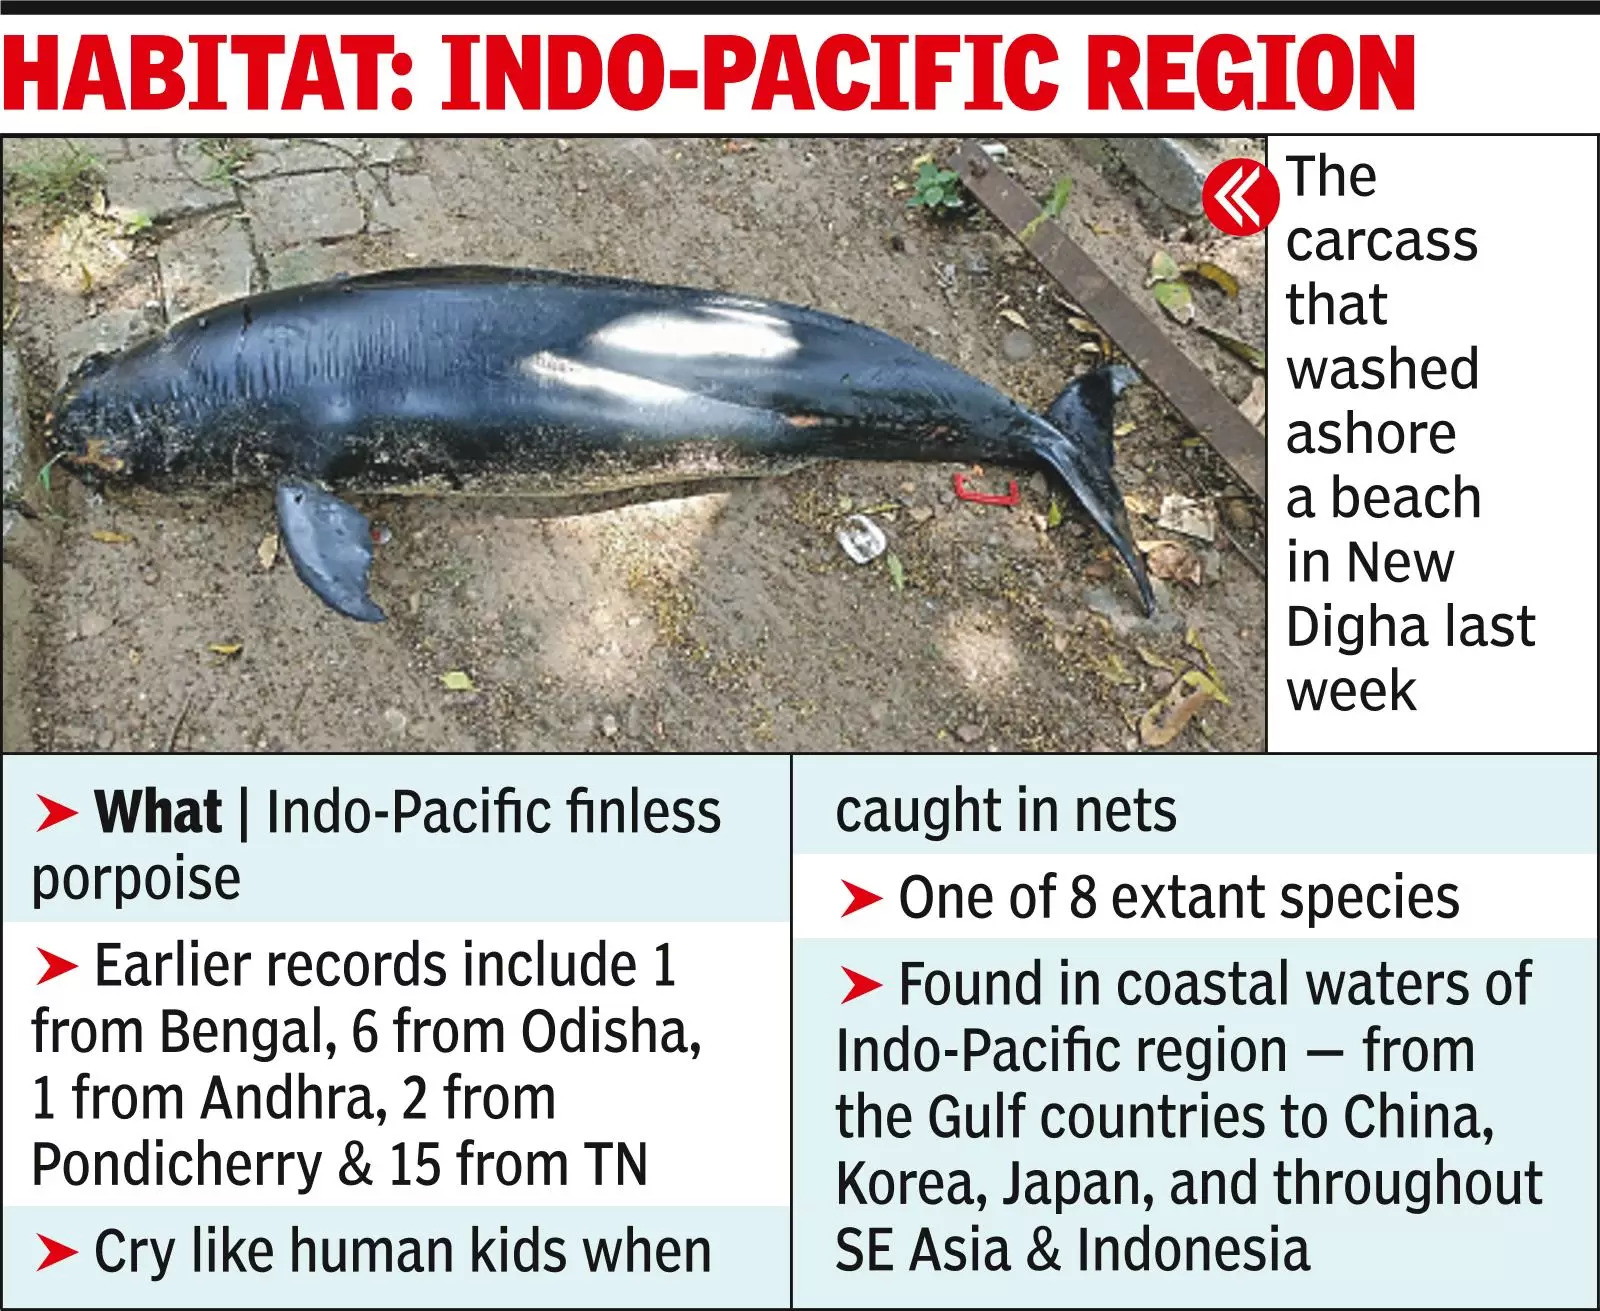 Digha’s dolphin-like animal was finless porpoise, one of the smallest whales